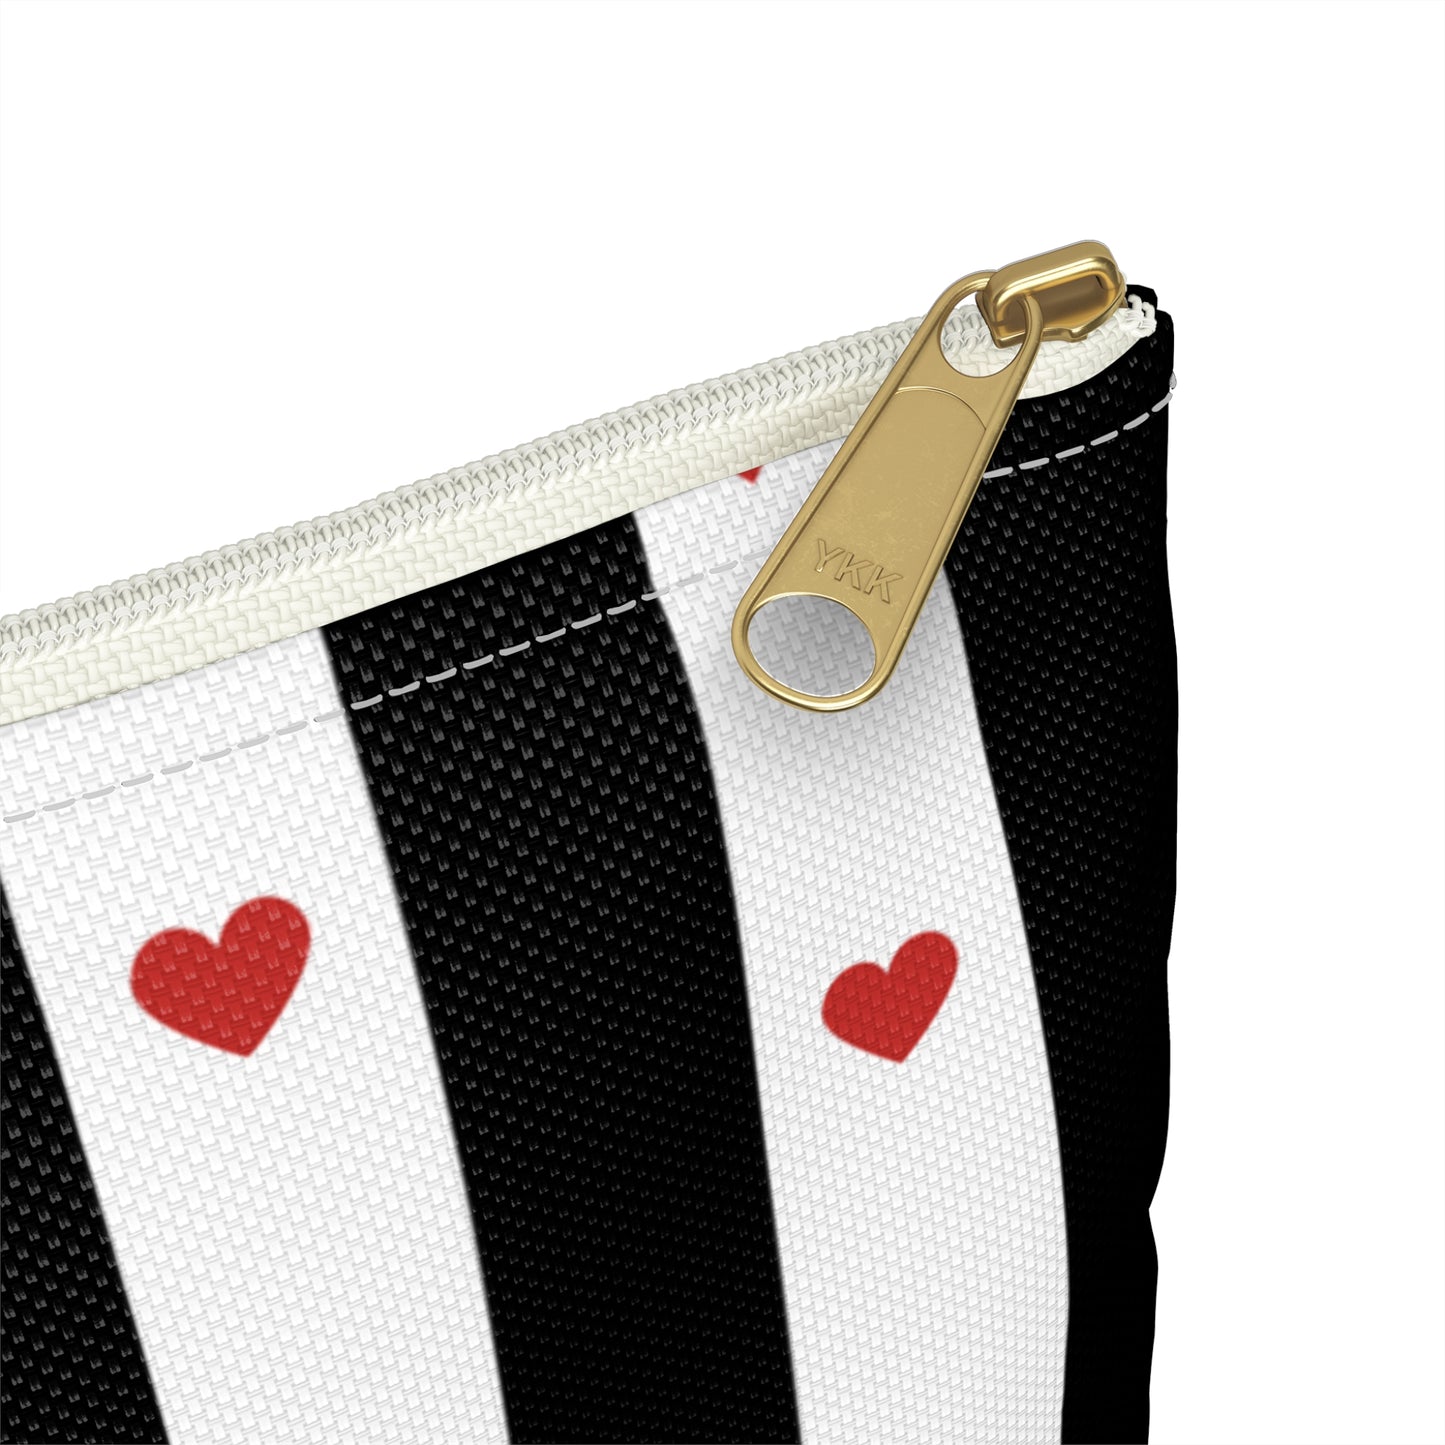 a black and white striped purse with red hearts on it